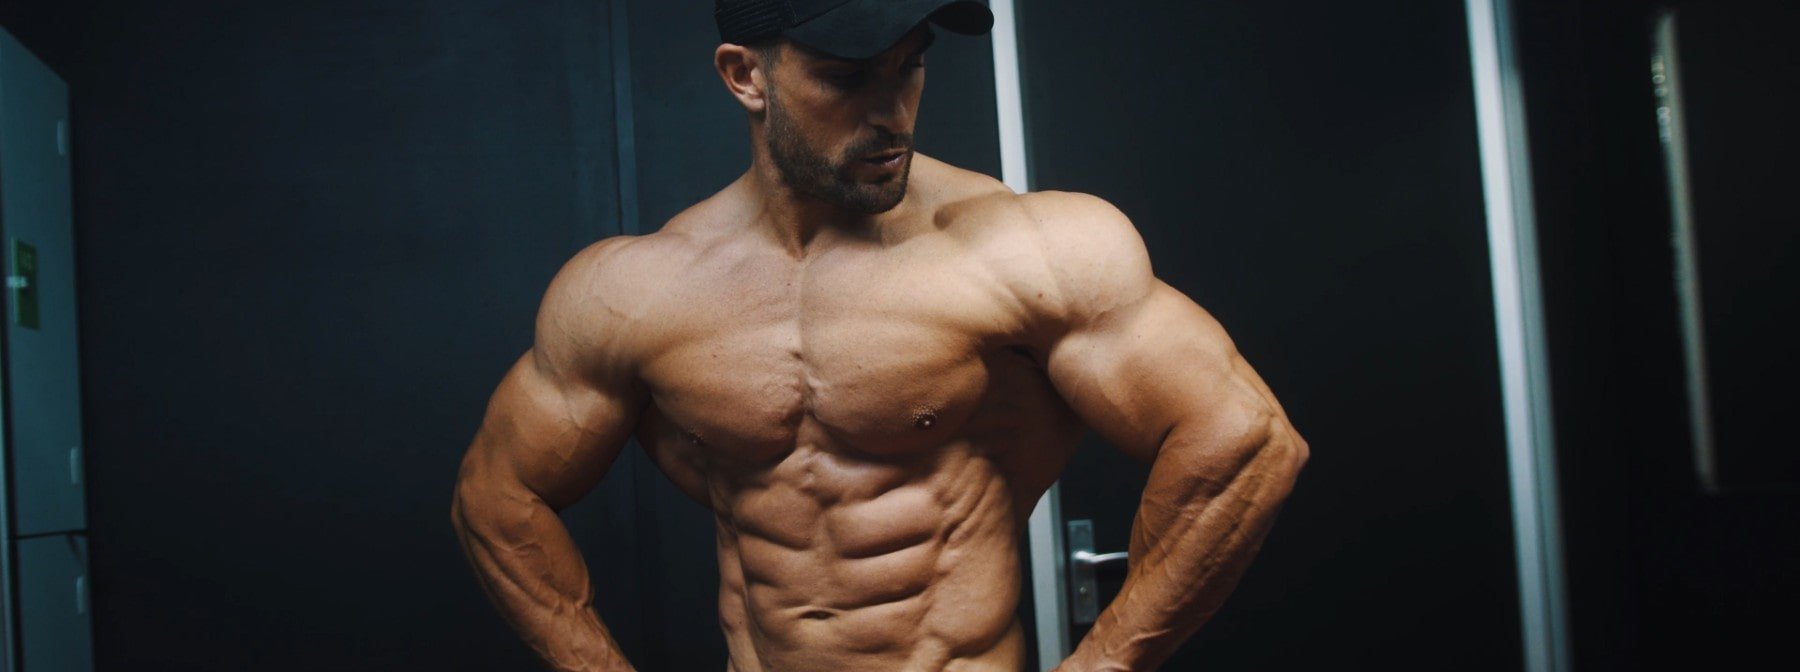 Bodybuilder Ryan Terry Reveals What It Takes To Compete at the Arnold Classic | On The Wall